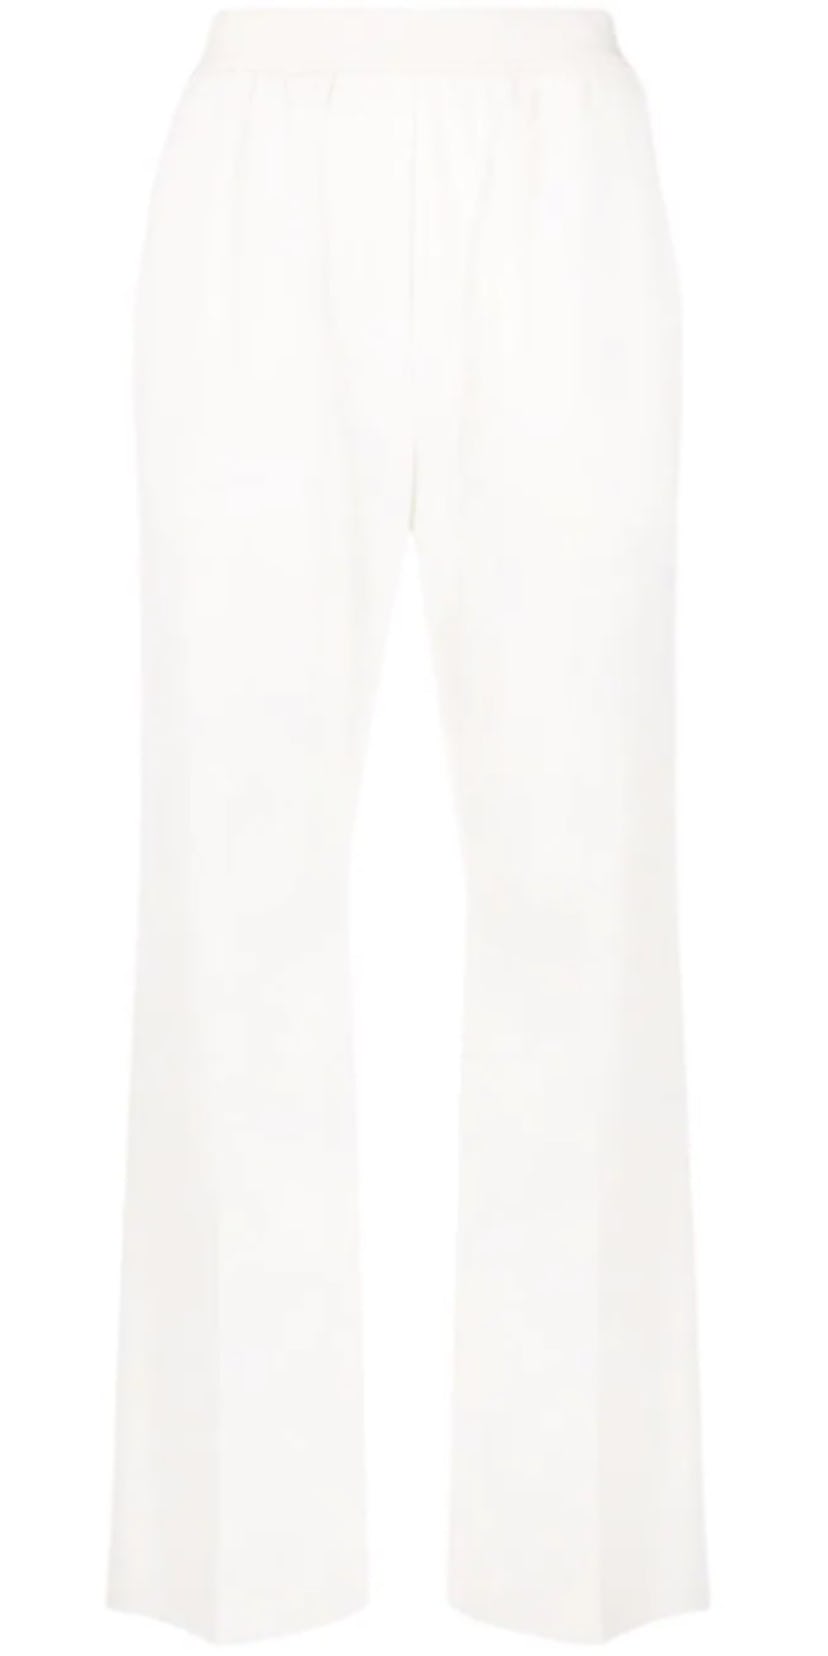 High-Rise Flared Trousers